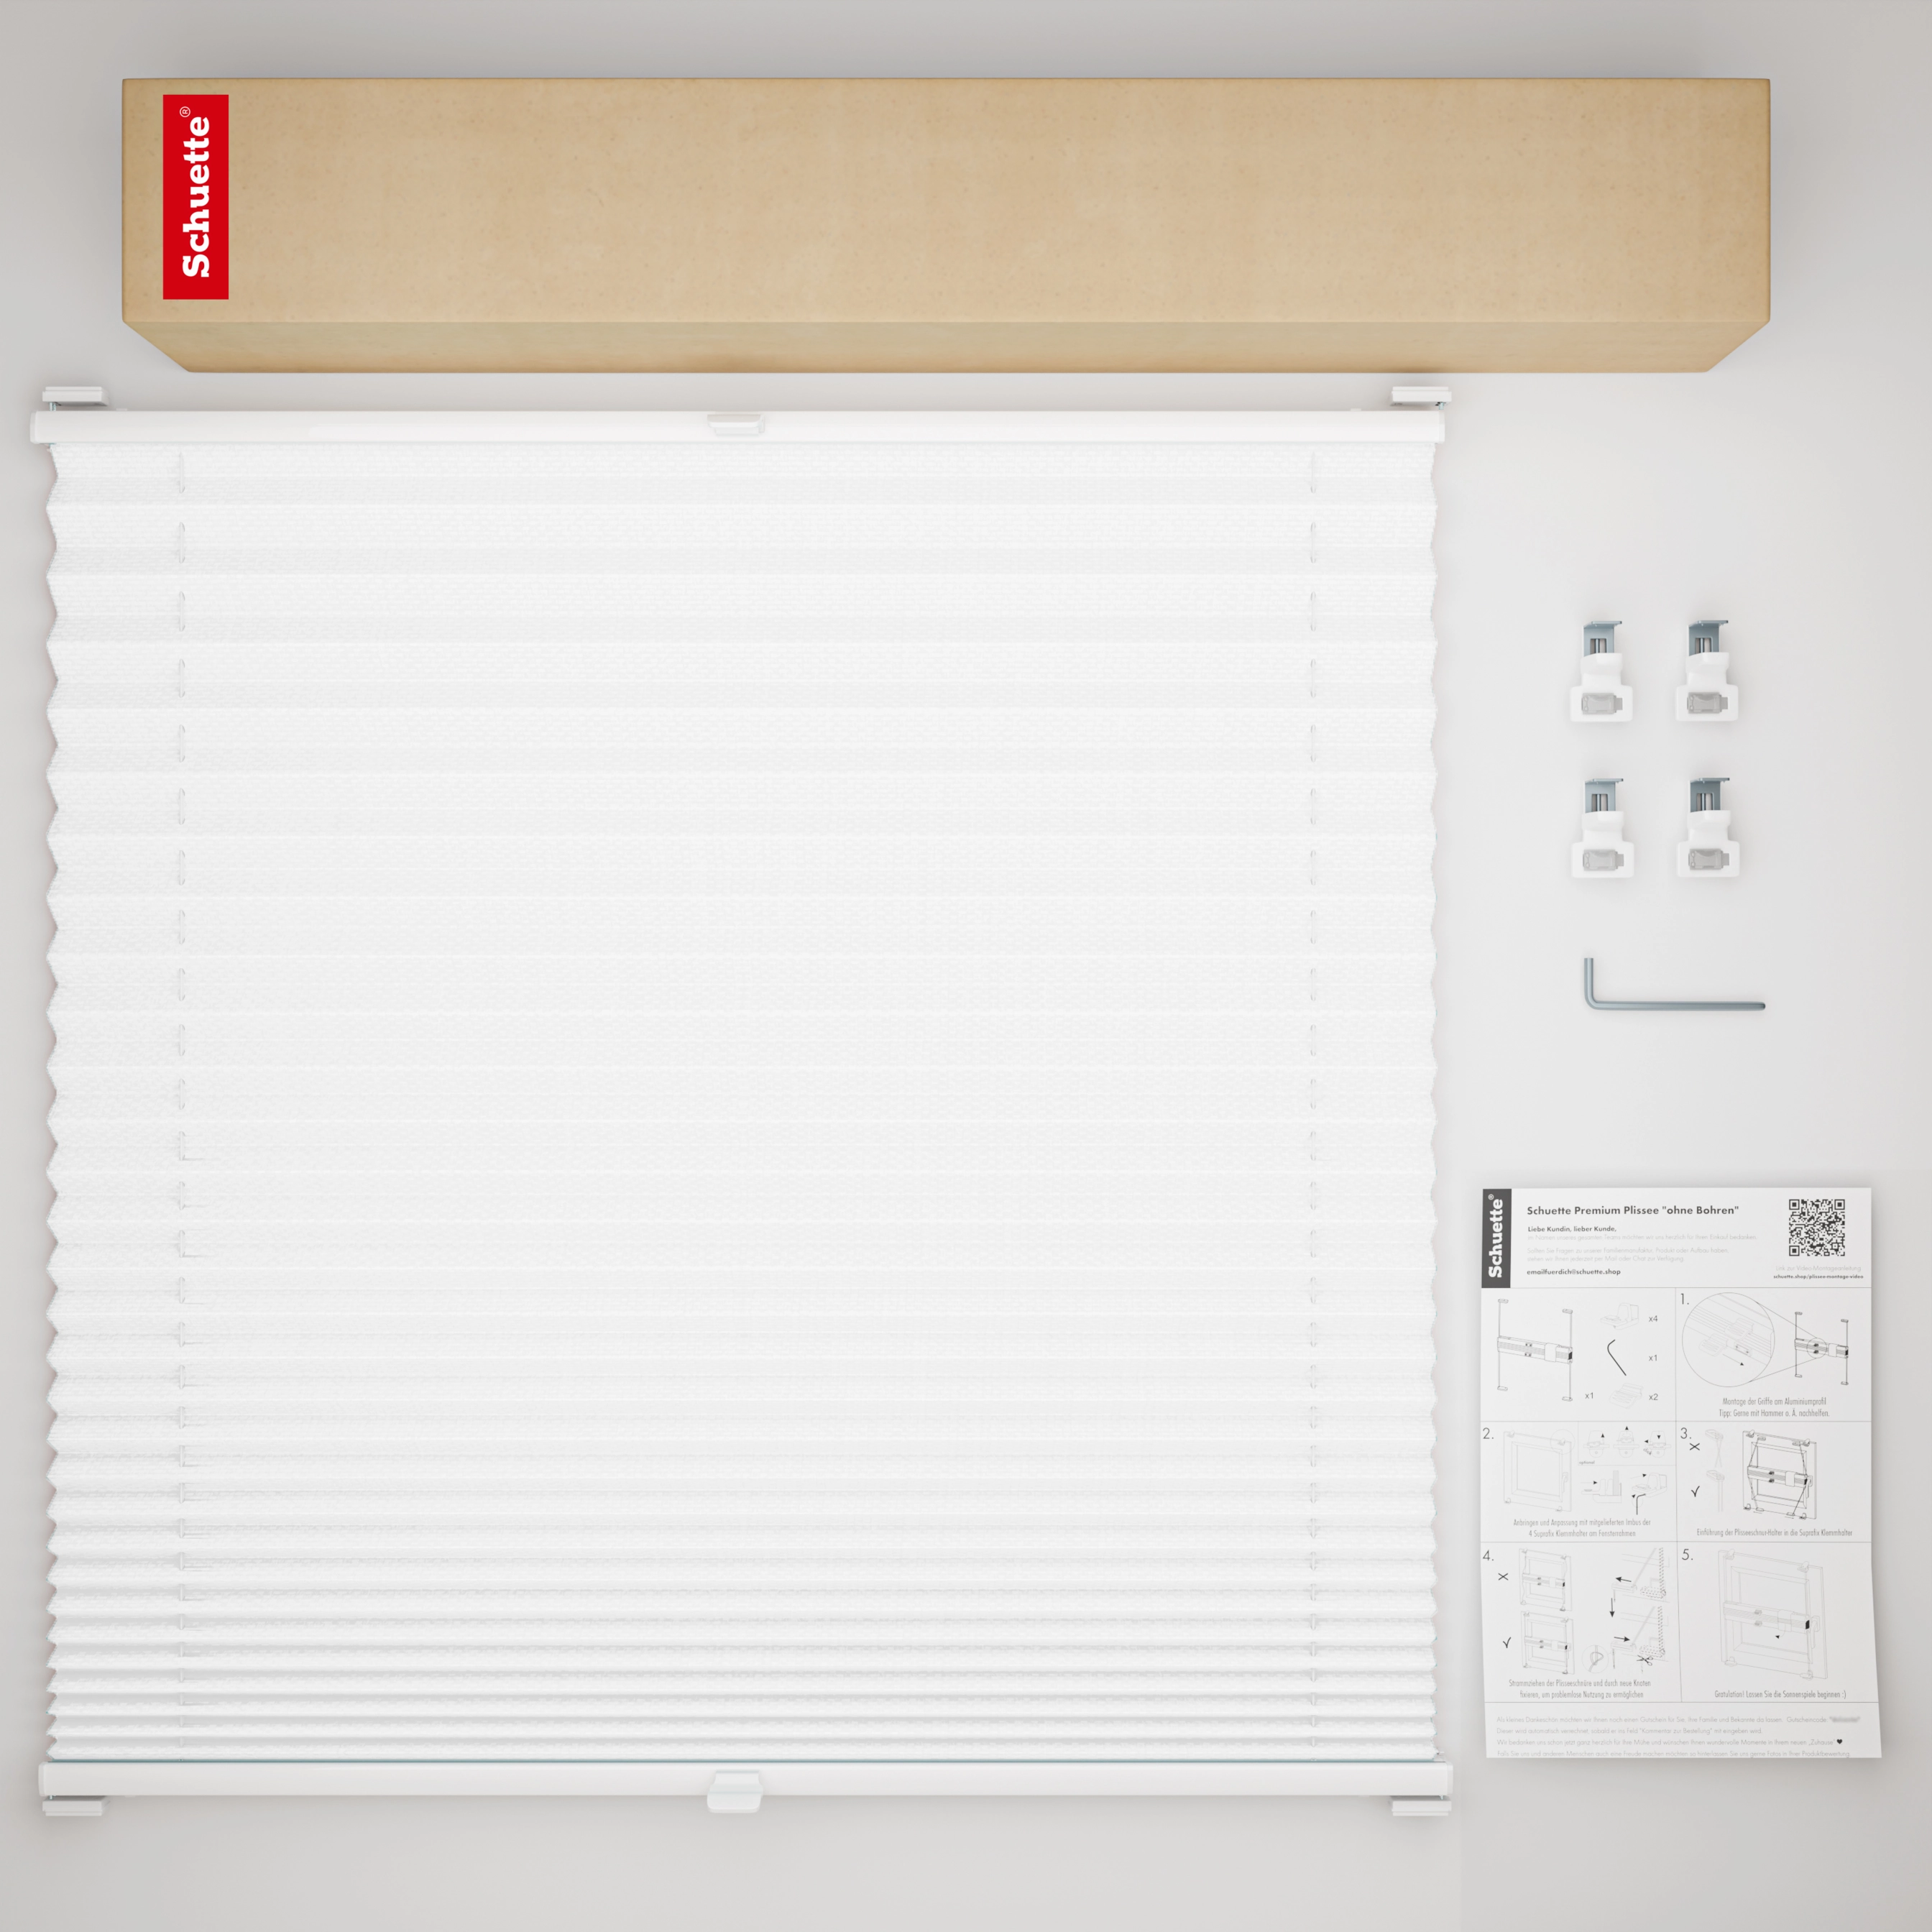 Schuette® Pleated blind without drilling made-to-measure • Suprafix Clamp holder “Screw-on” • Premium Collection: White Day (White) • Profile color: White